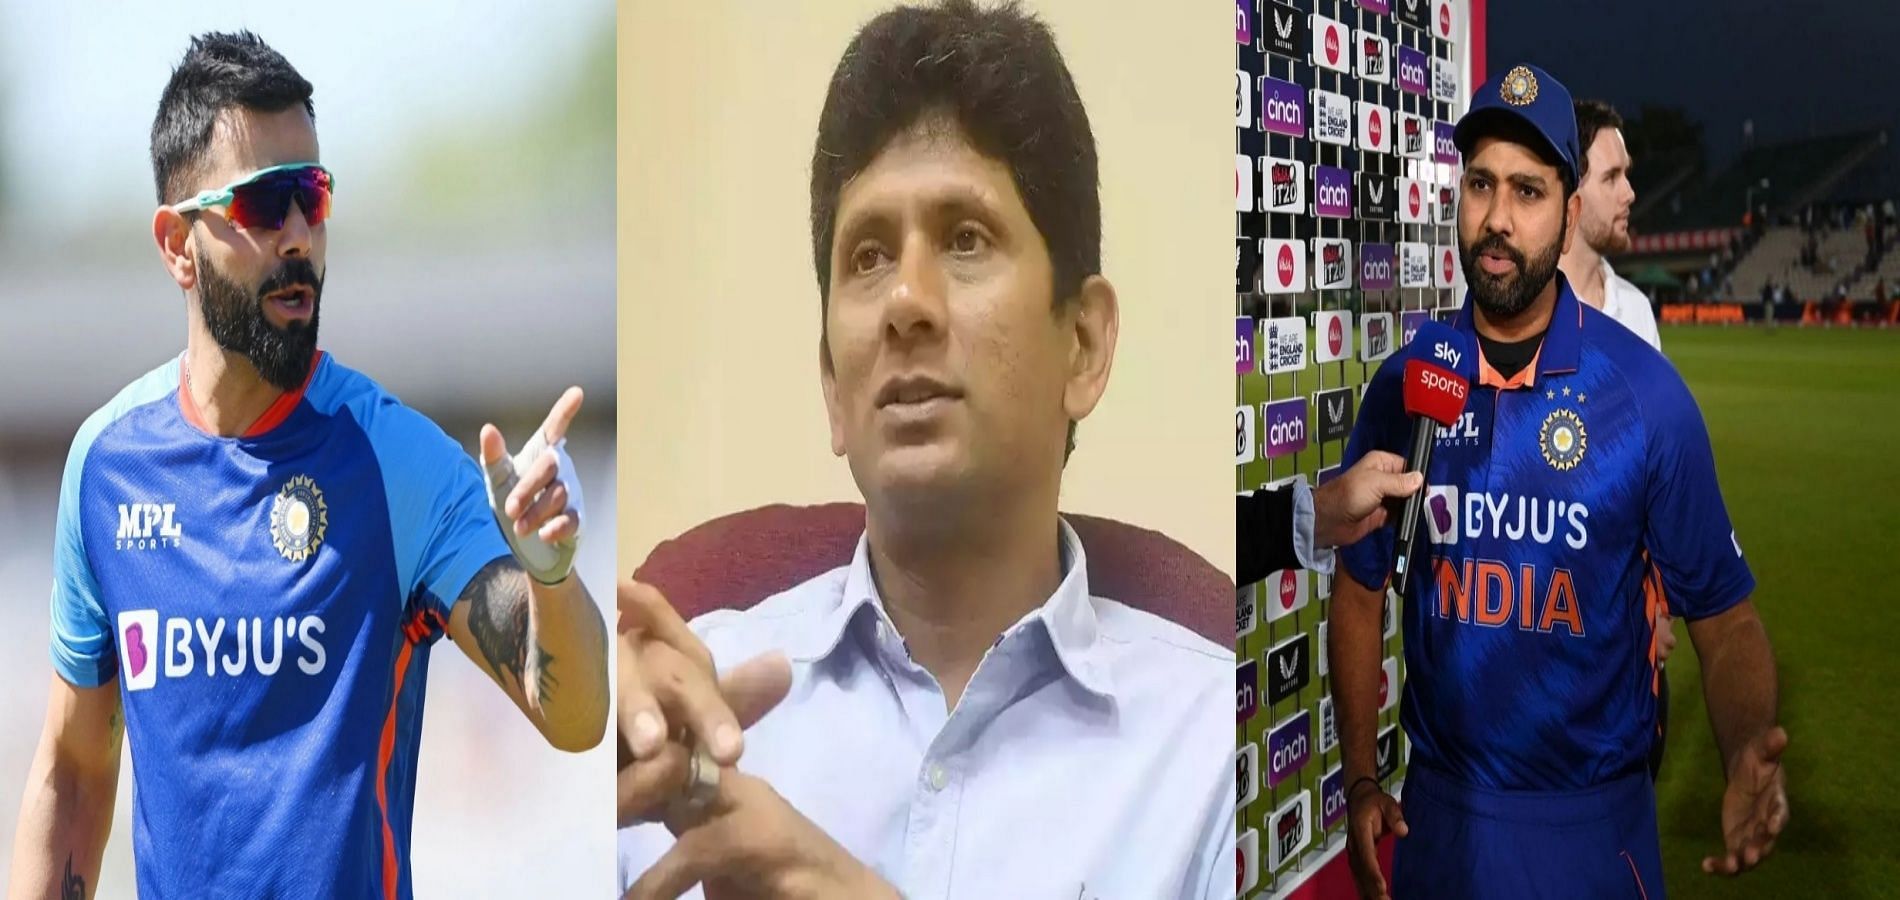 “Sourav, Sehwag, Yuvraj all have been dropped” - Venkatesh Prasad questions rest for out-of-form Indian batters